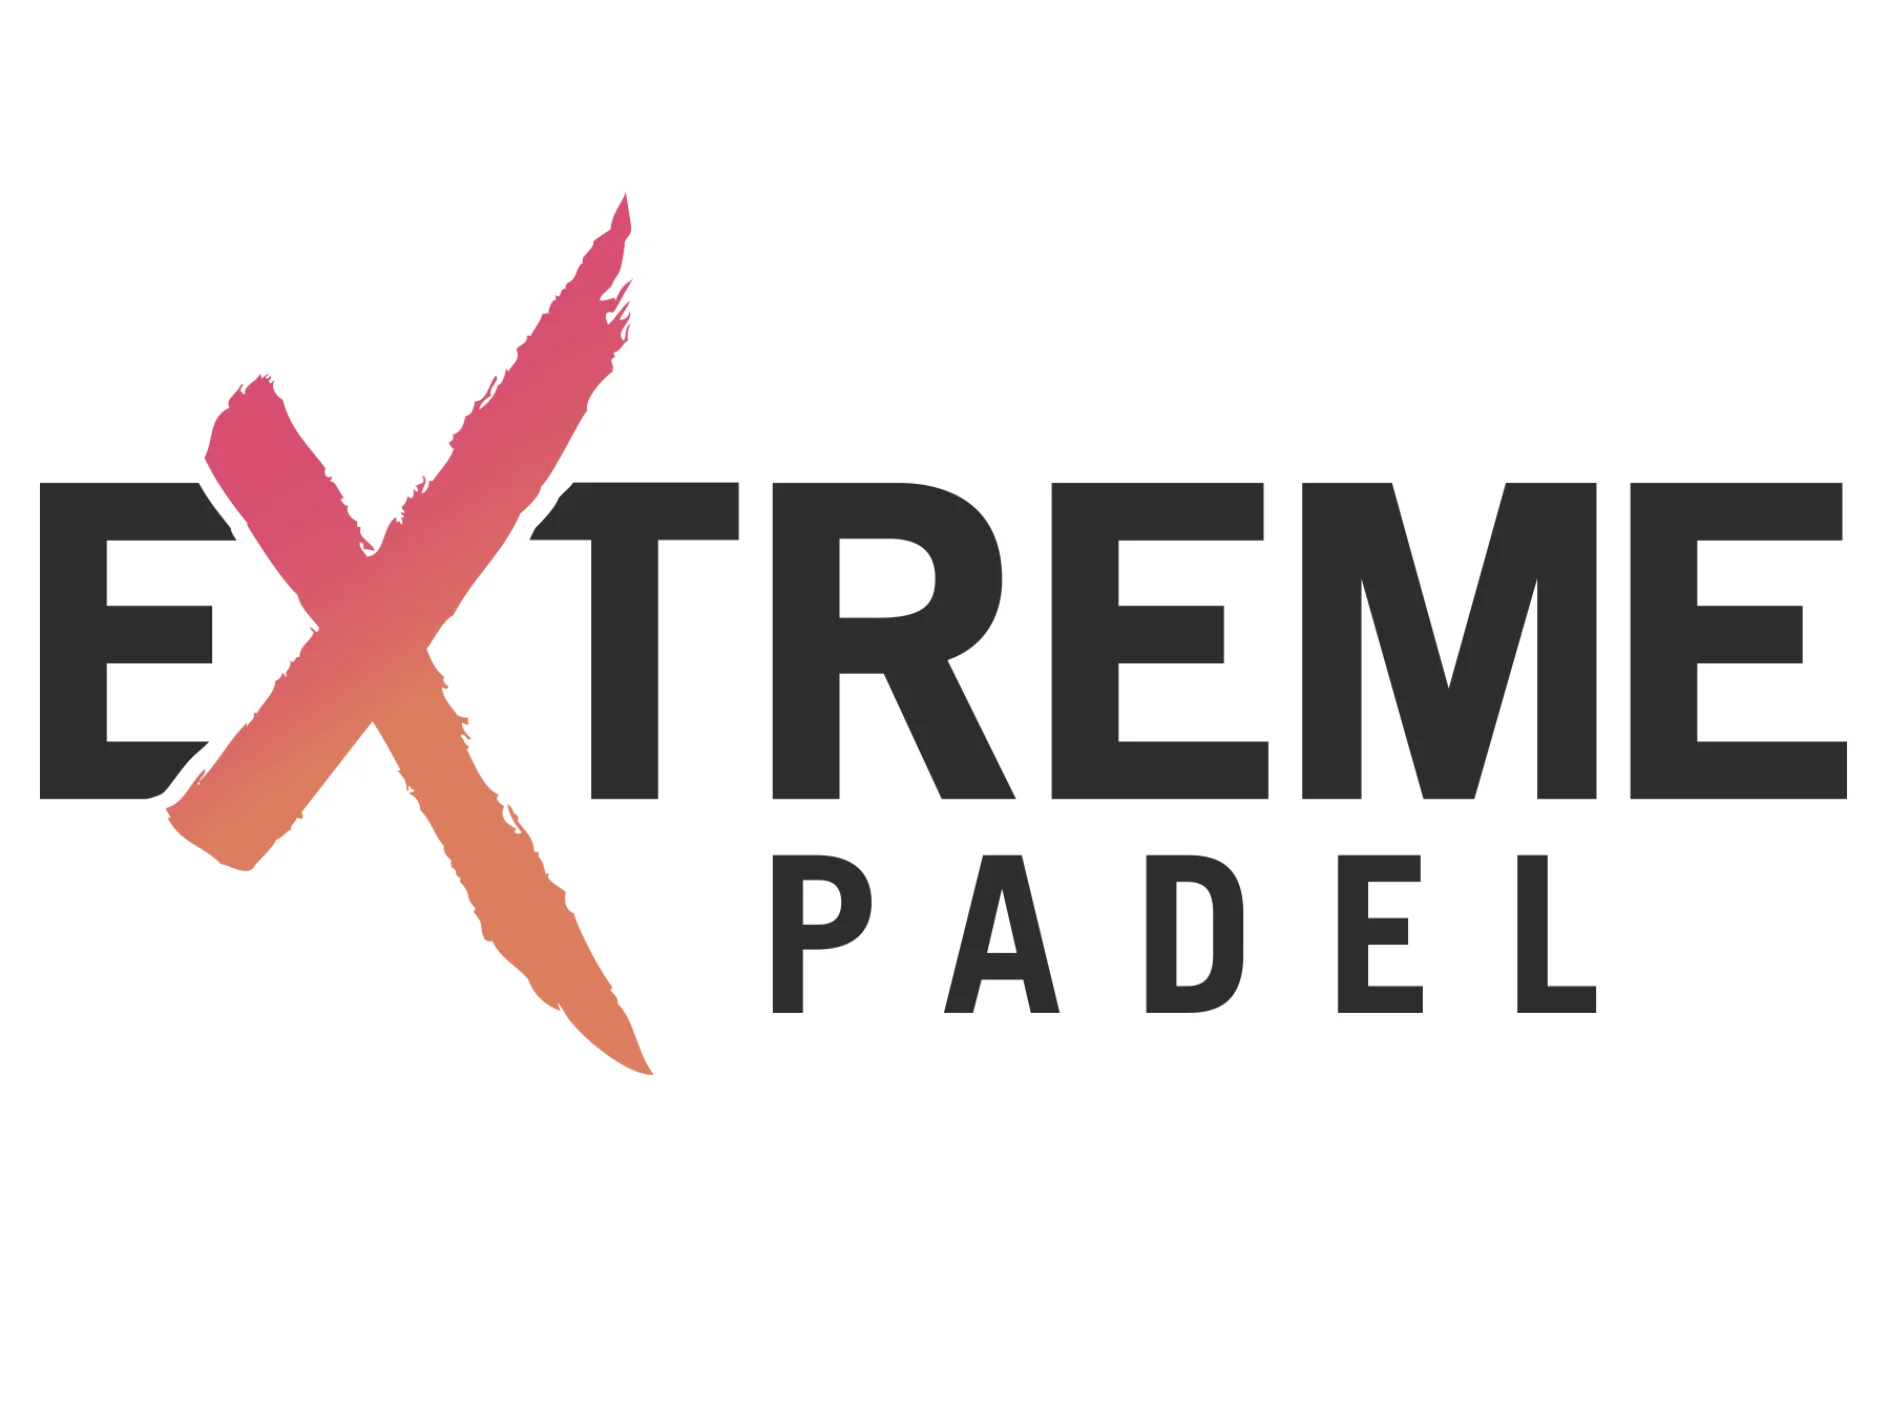 Extreme Padel : din passionerade expert